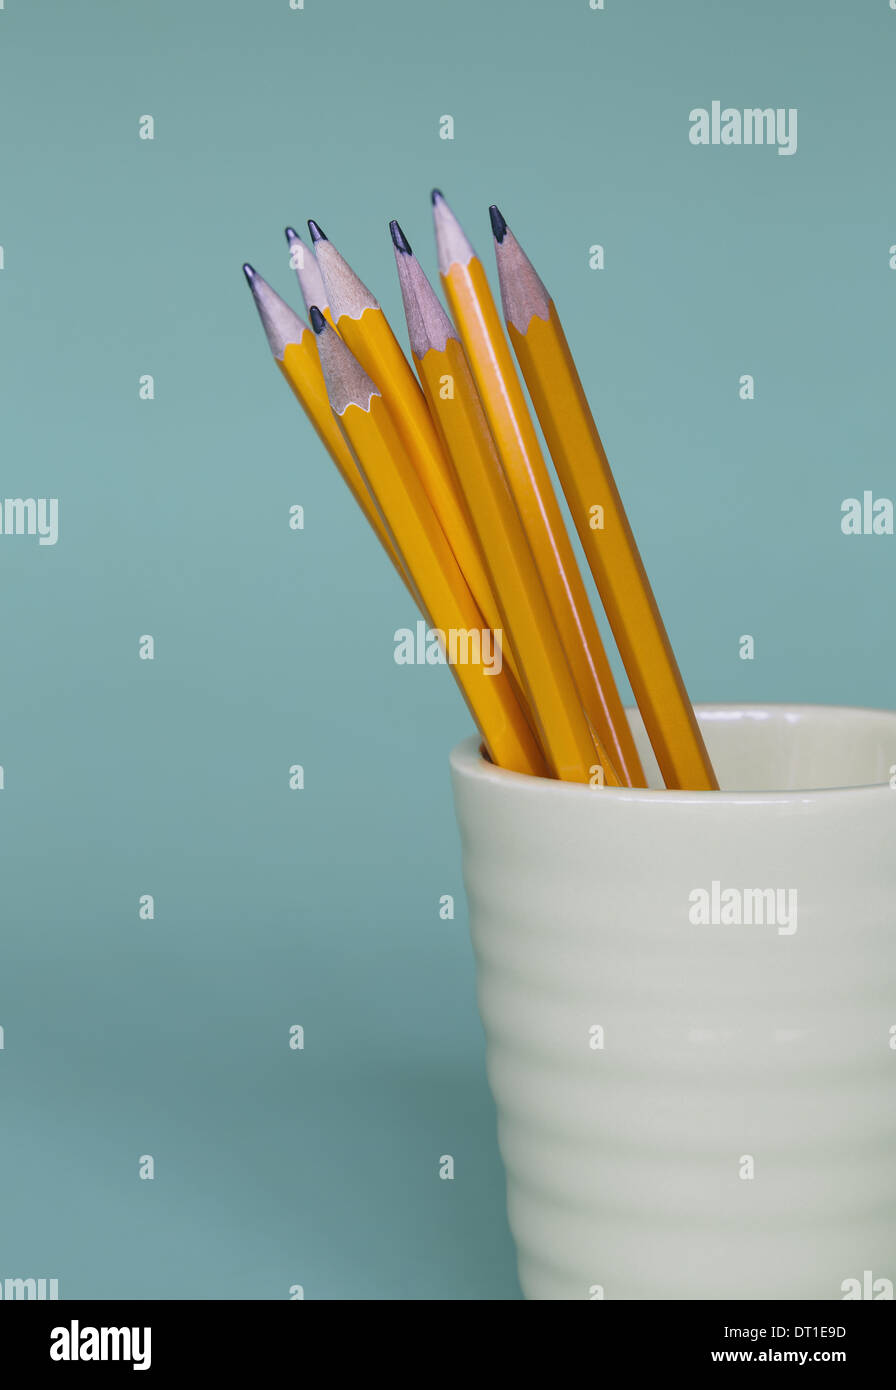 Sharpened pencils in cup on blue background Stock Photo